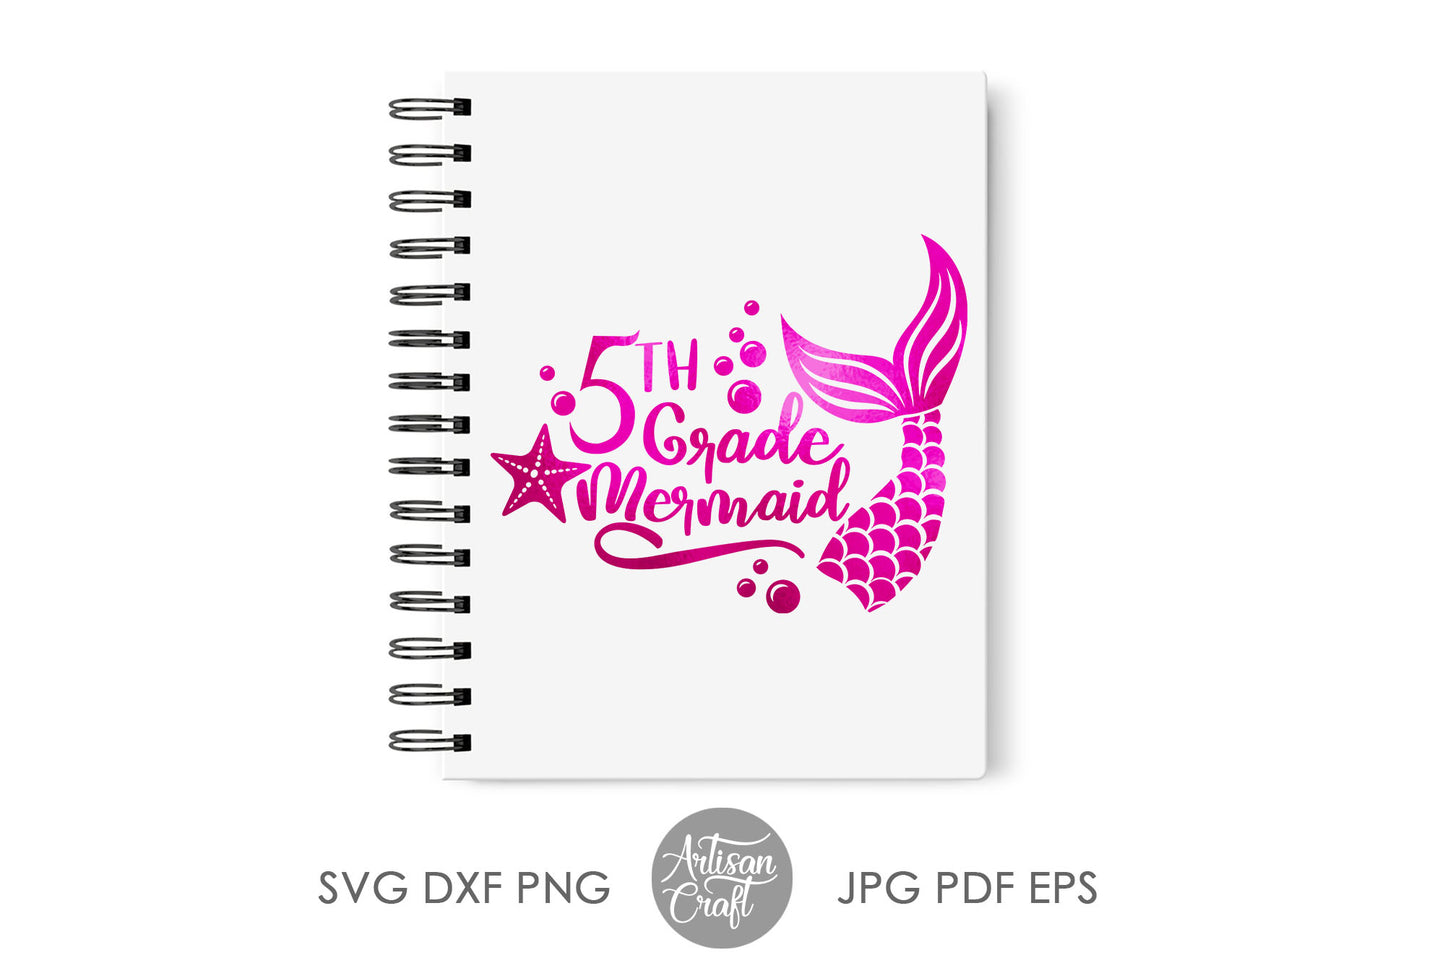 Mermaid tail SVG, back to school SVG